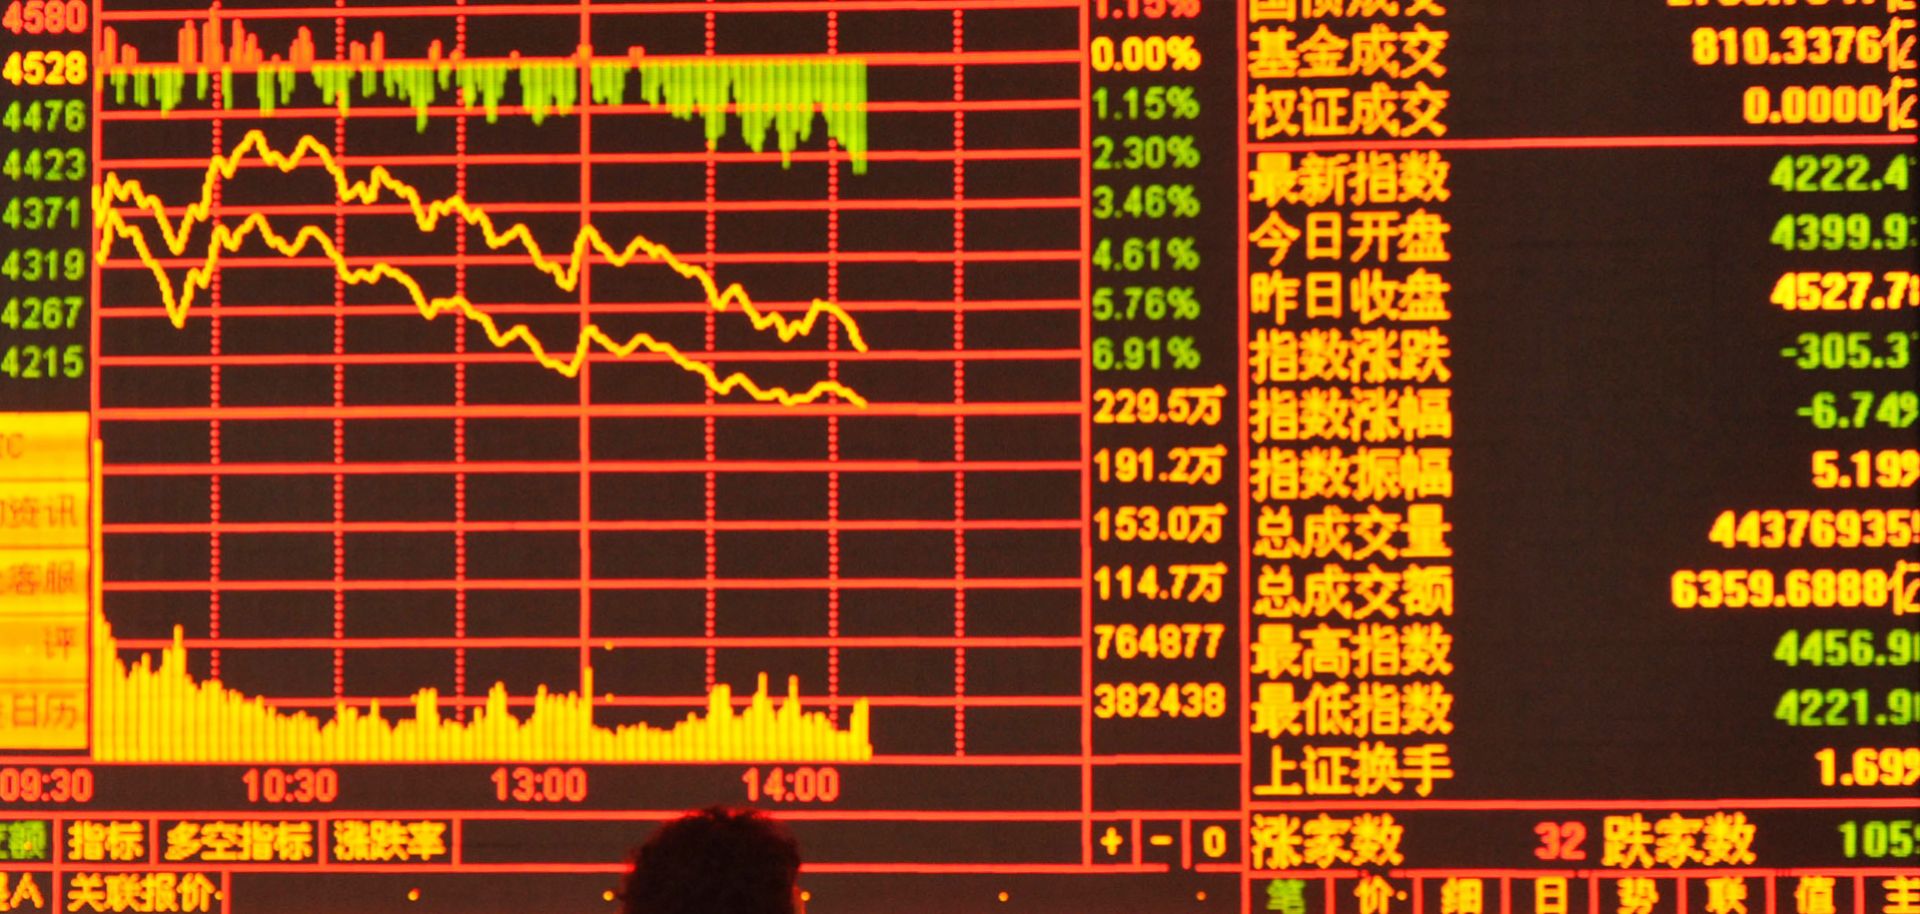 An investor watches the stock market at a stock exchange hall June 26 in Fuyang, China.